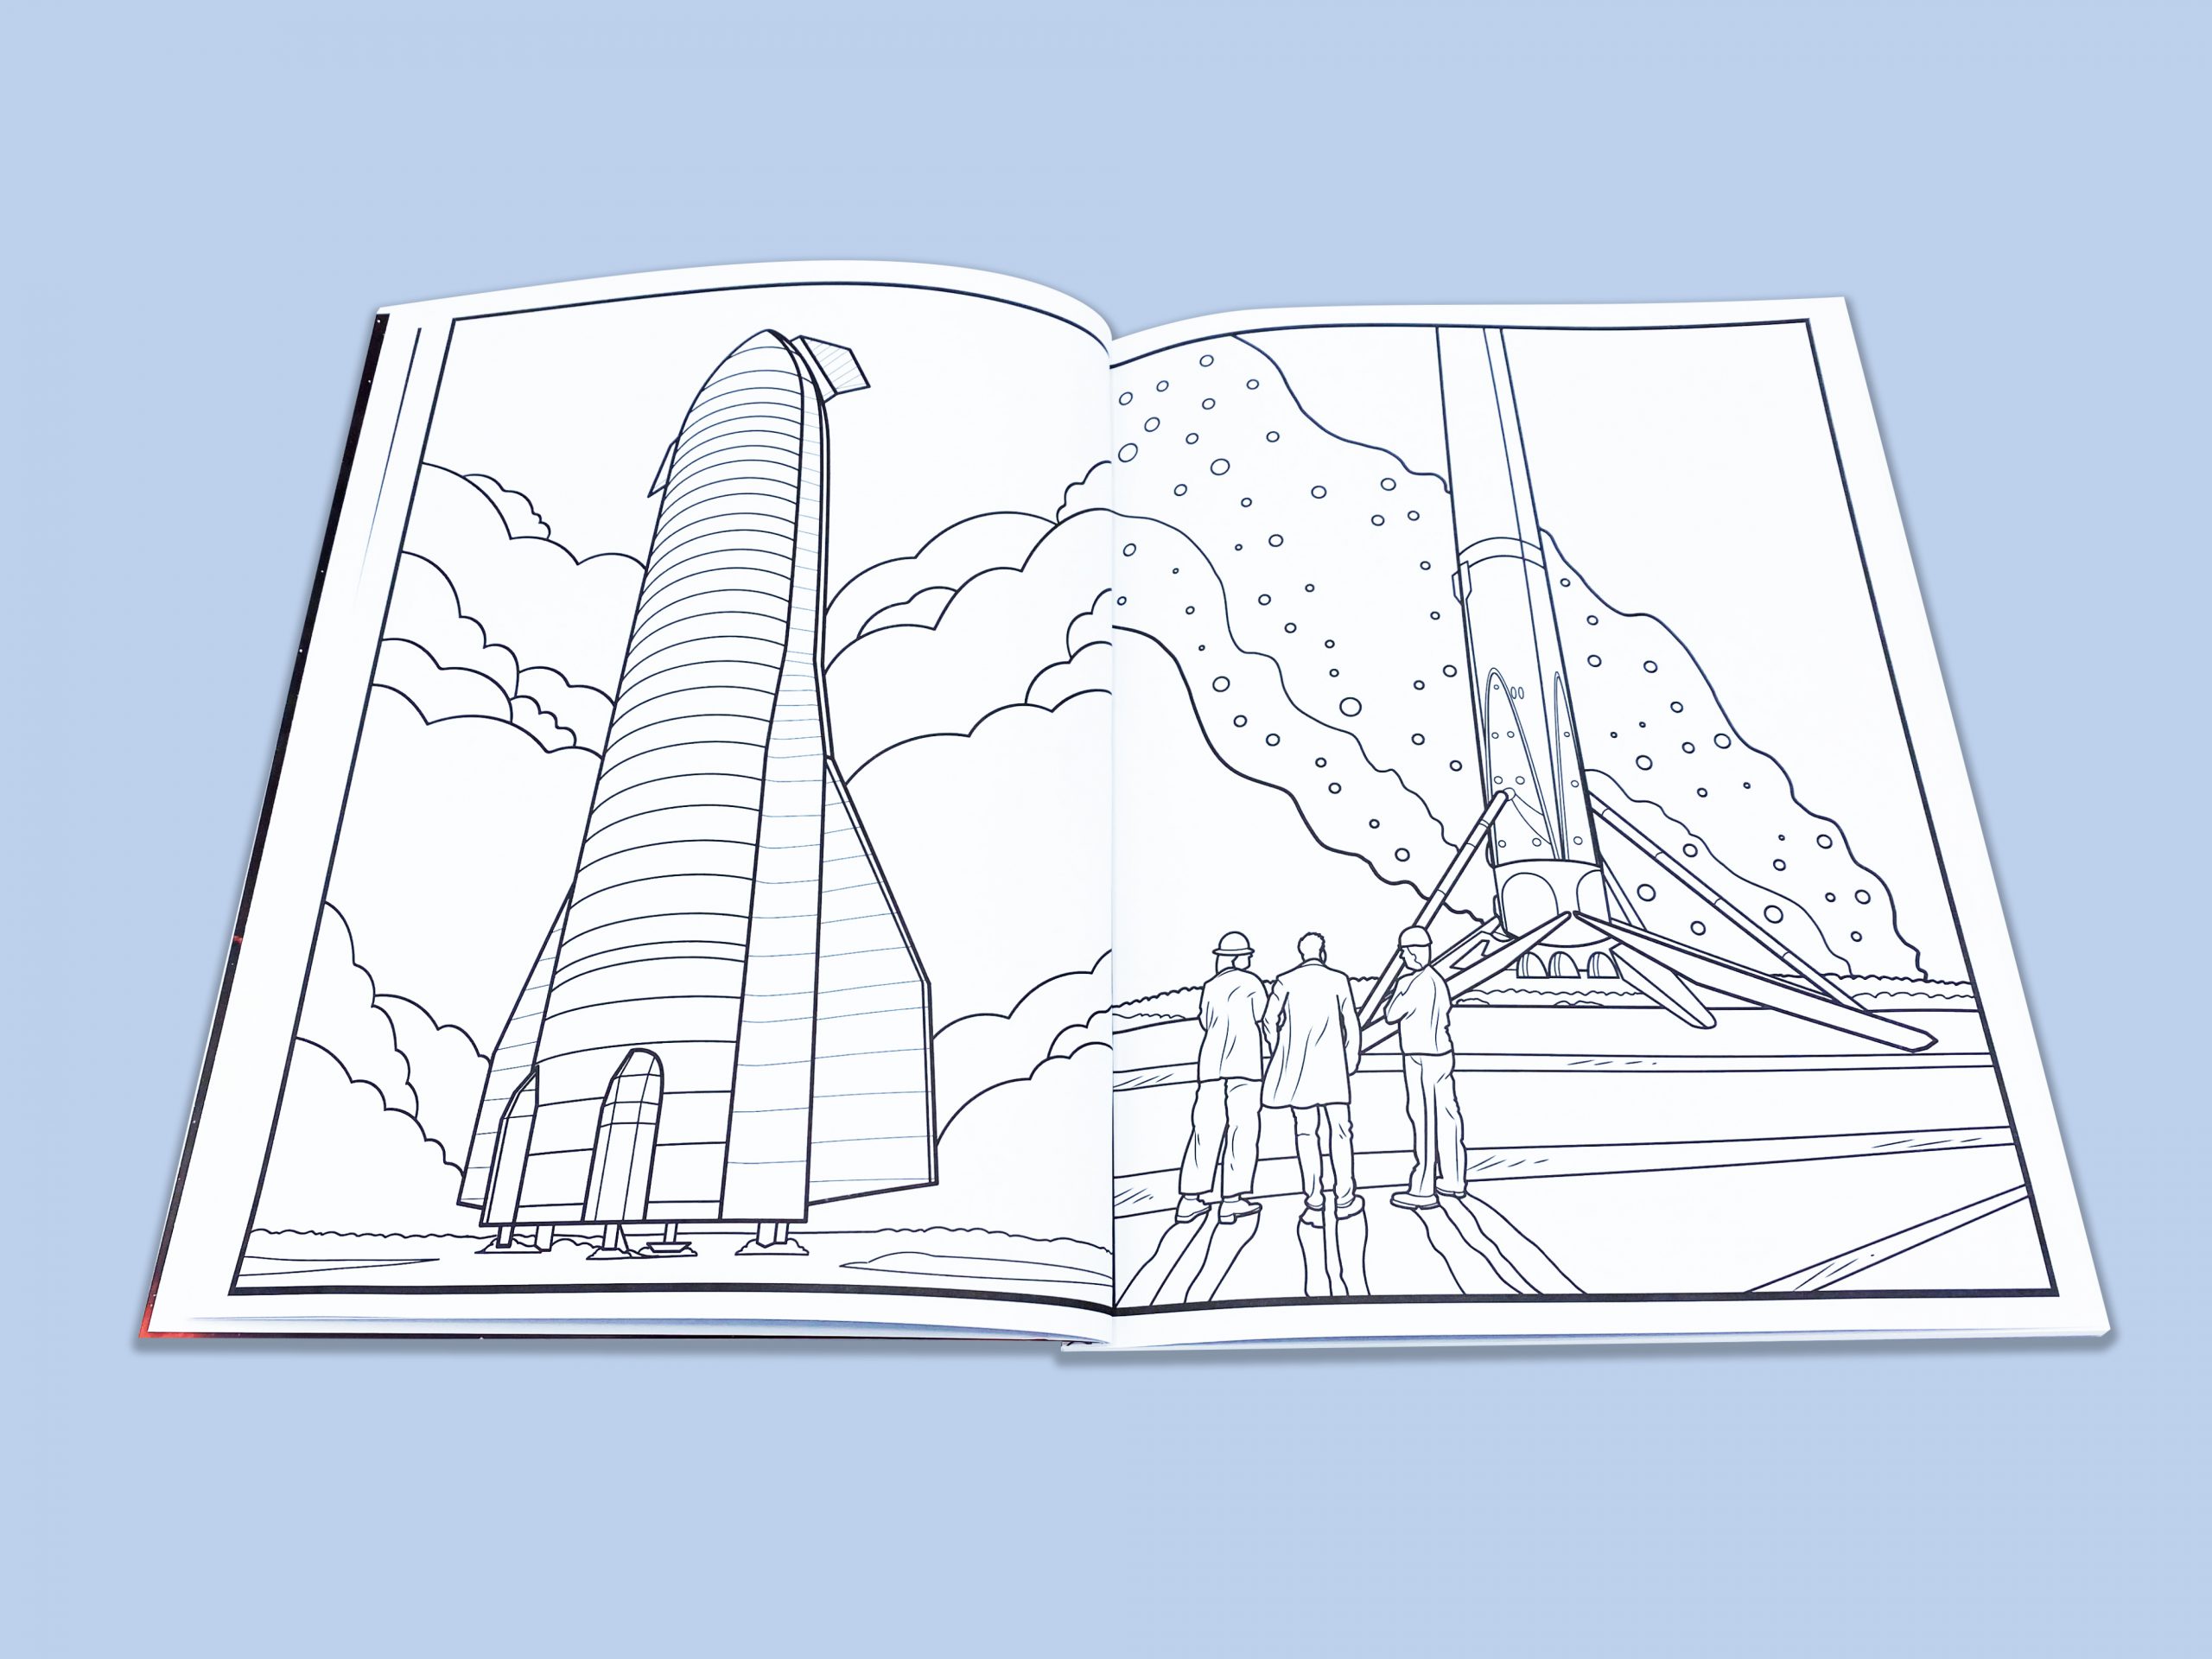 Page starman spacex coloring book â the adventures of starman